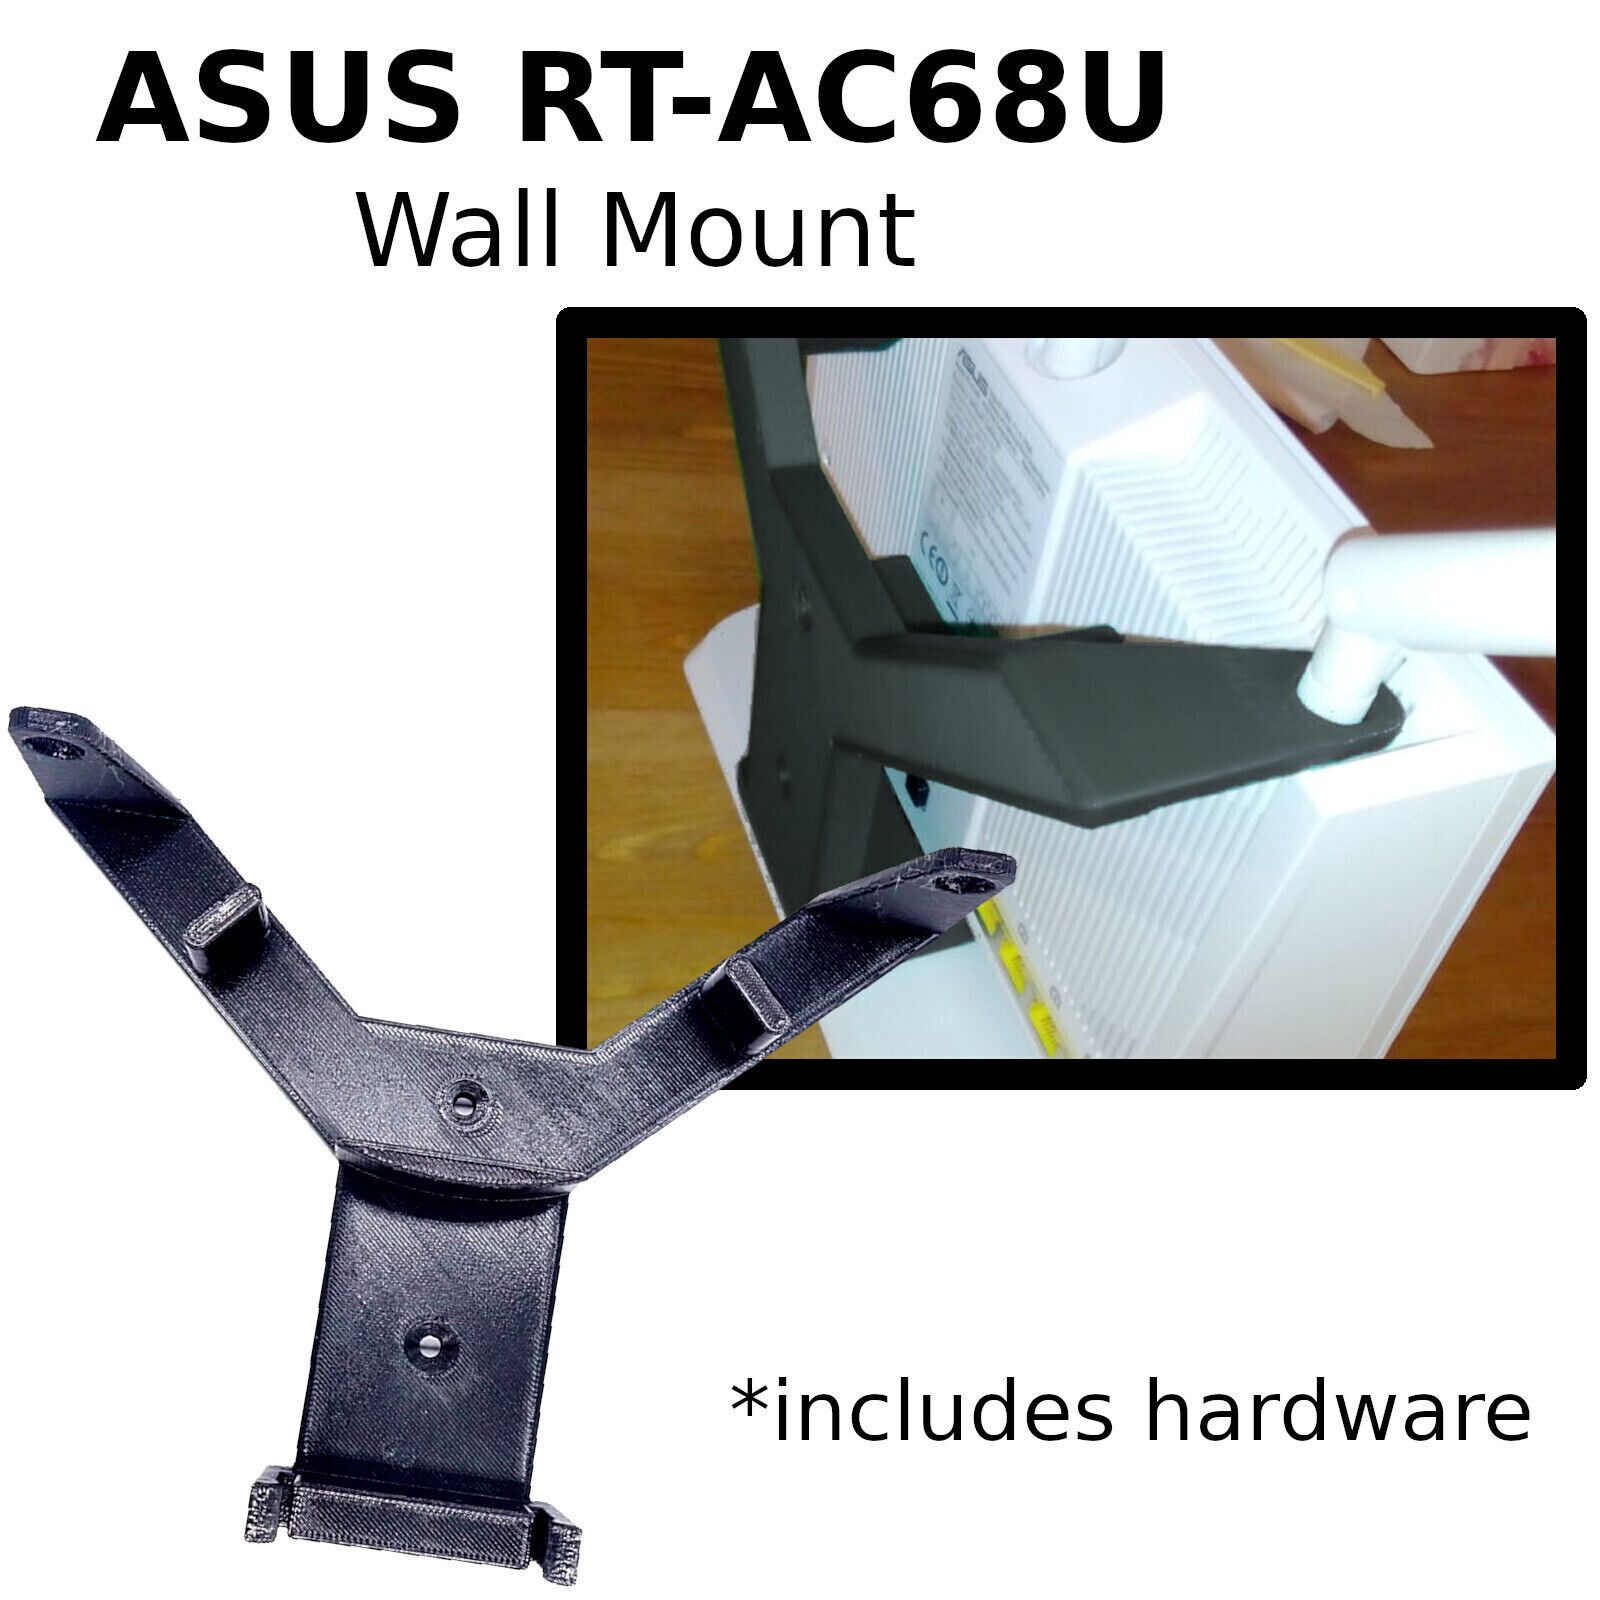 Low Profile Wall Mount for ASUS RT-AC68U WiFi Router